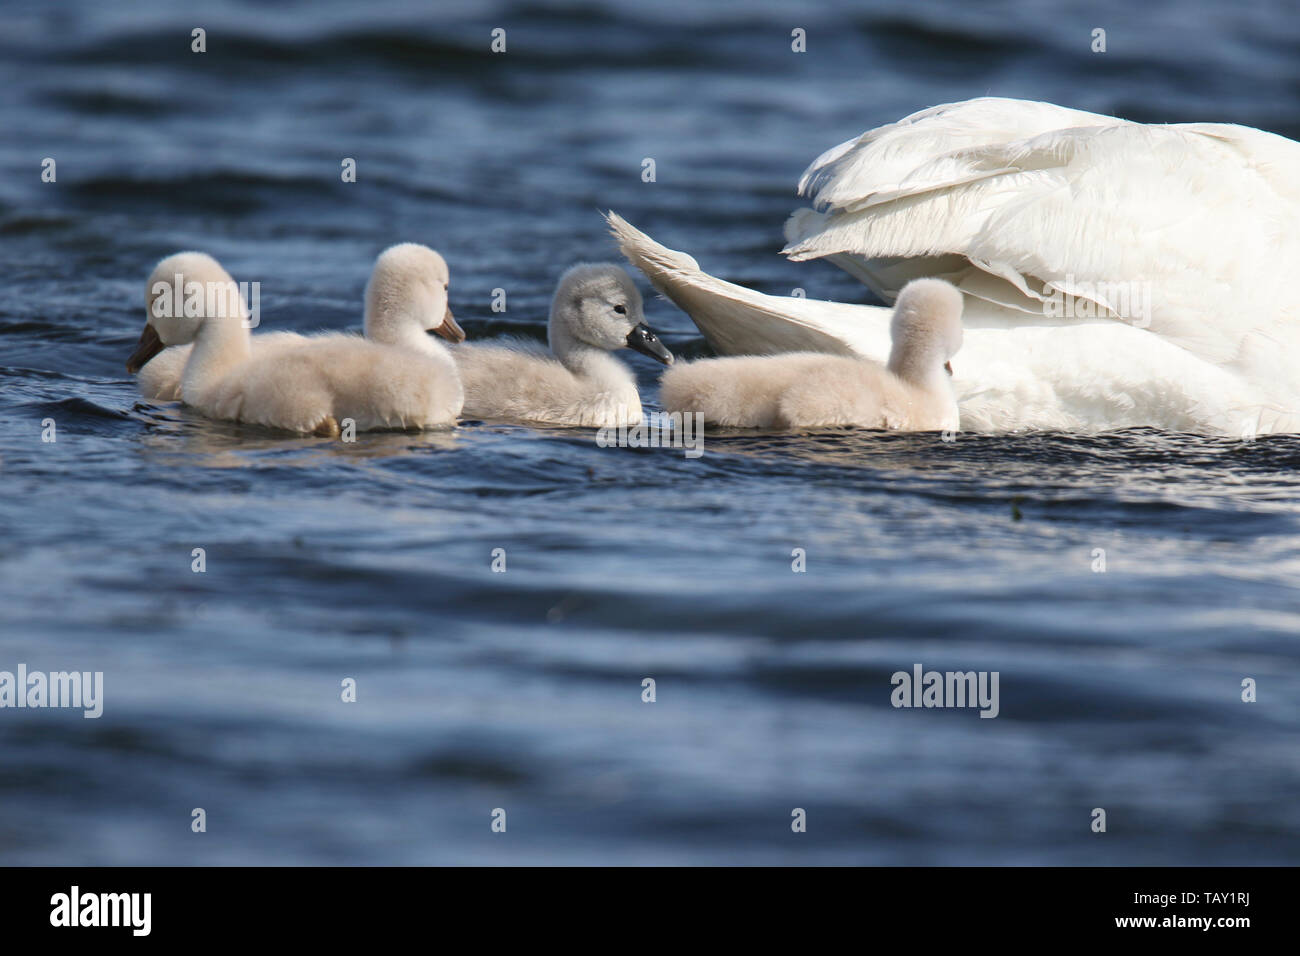 A group of mute swan Cygnus olor cygnets swimming on a blue lake in Spring Stock Photo